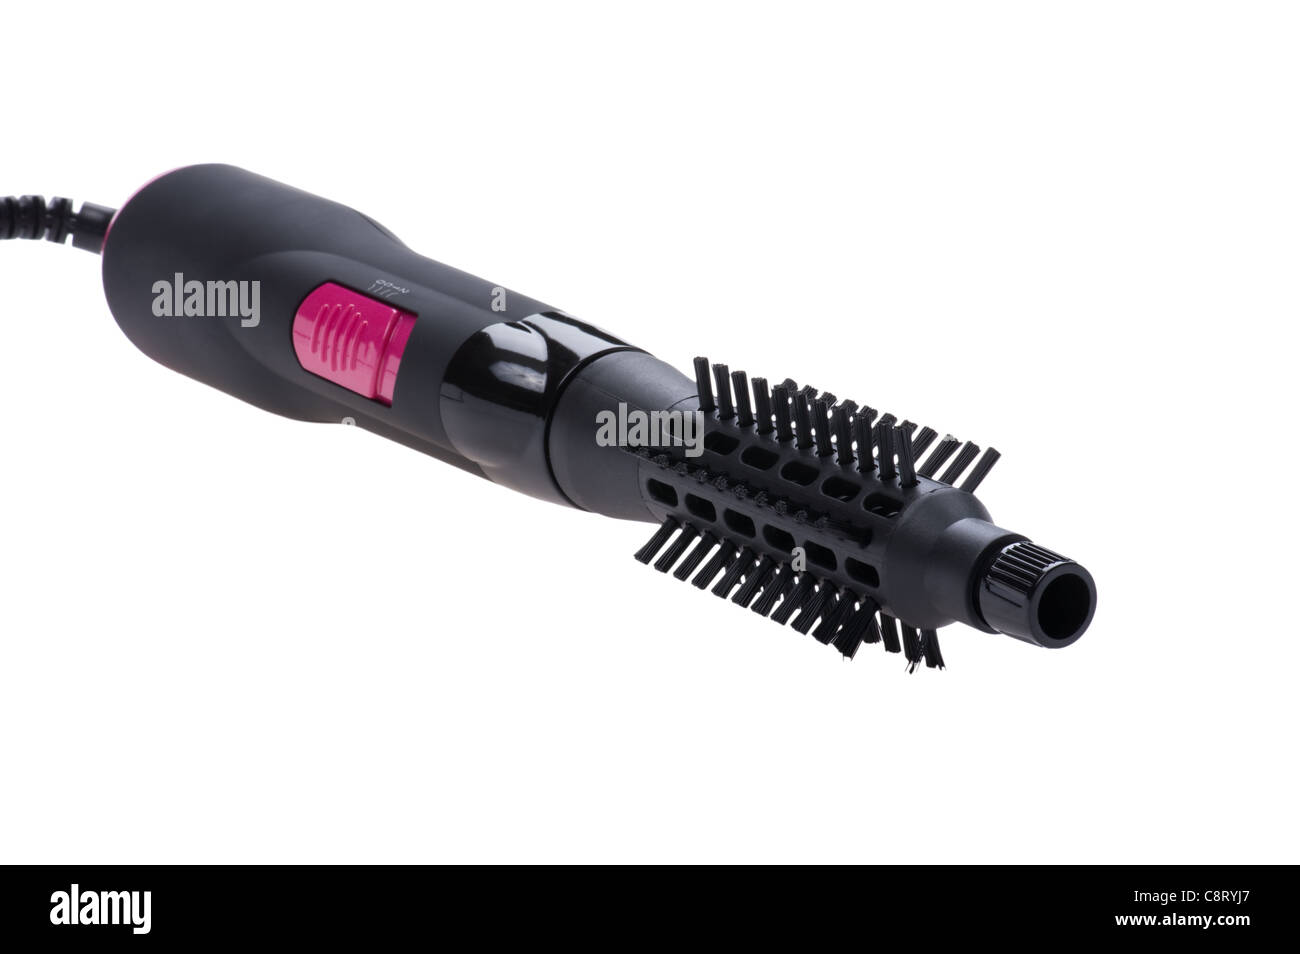 Hair dryer comb attachment Cut Out Stock Images & Pictures - Alamy